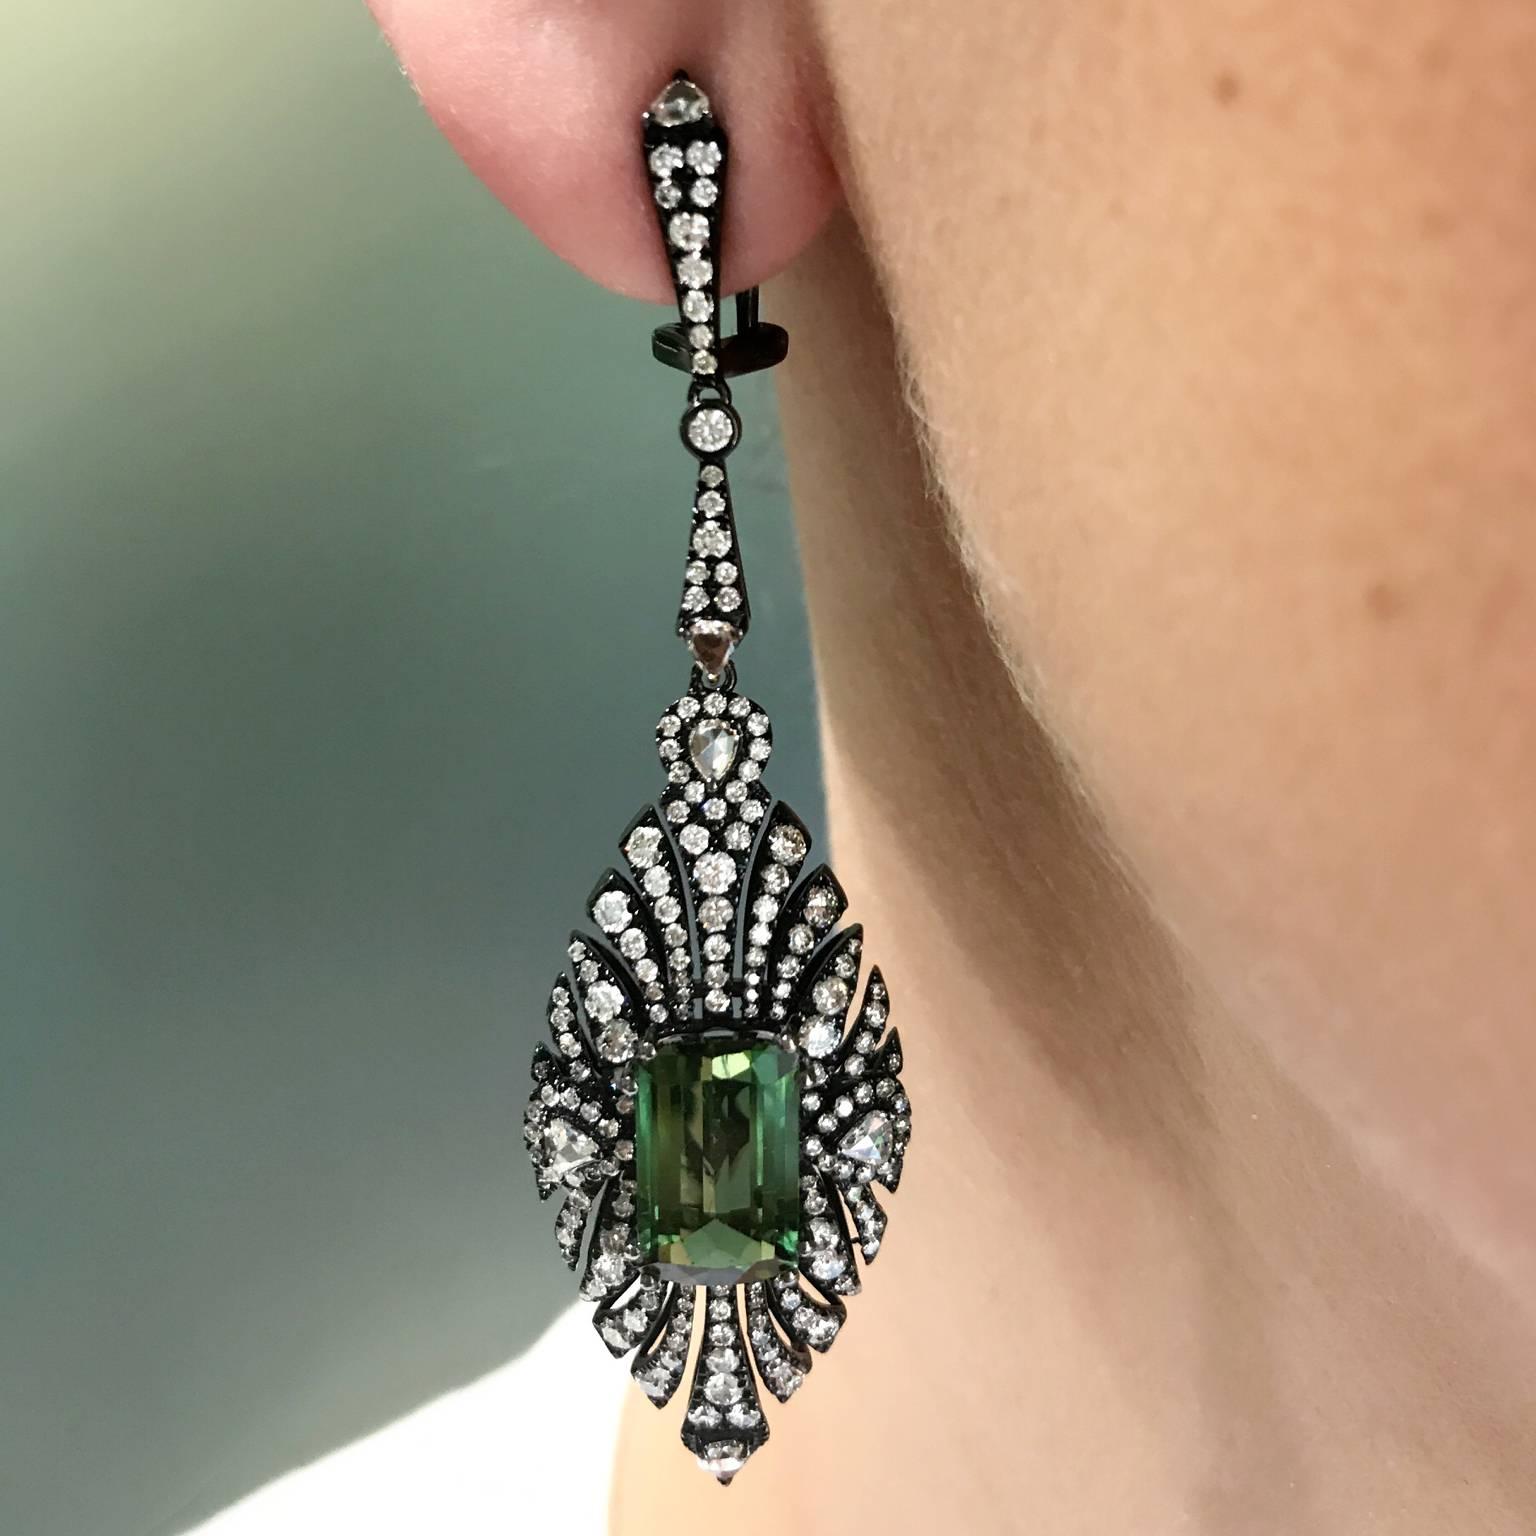 18k Black Rhodium Green Tourmaline (7.5x12mm, 7.80 total carat weight) Centers surrounded by 4.35 total Carats of Diamonds. Omega Clip / Post

70mm in Length
19mm in Width